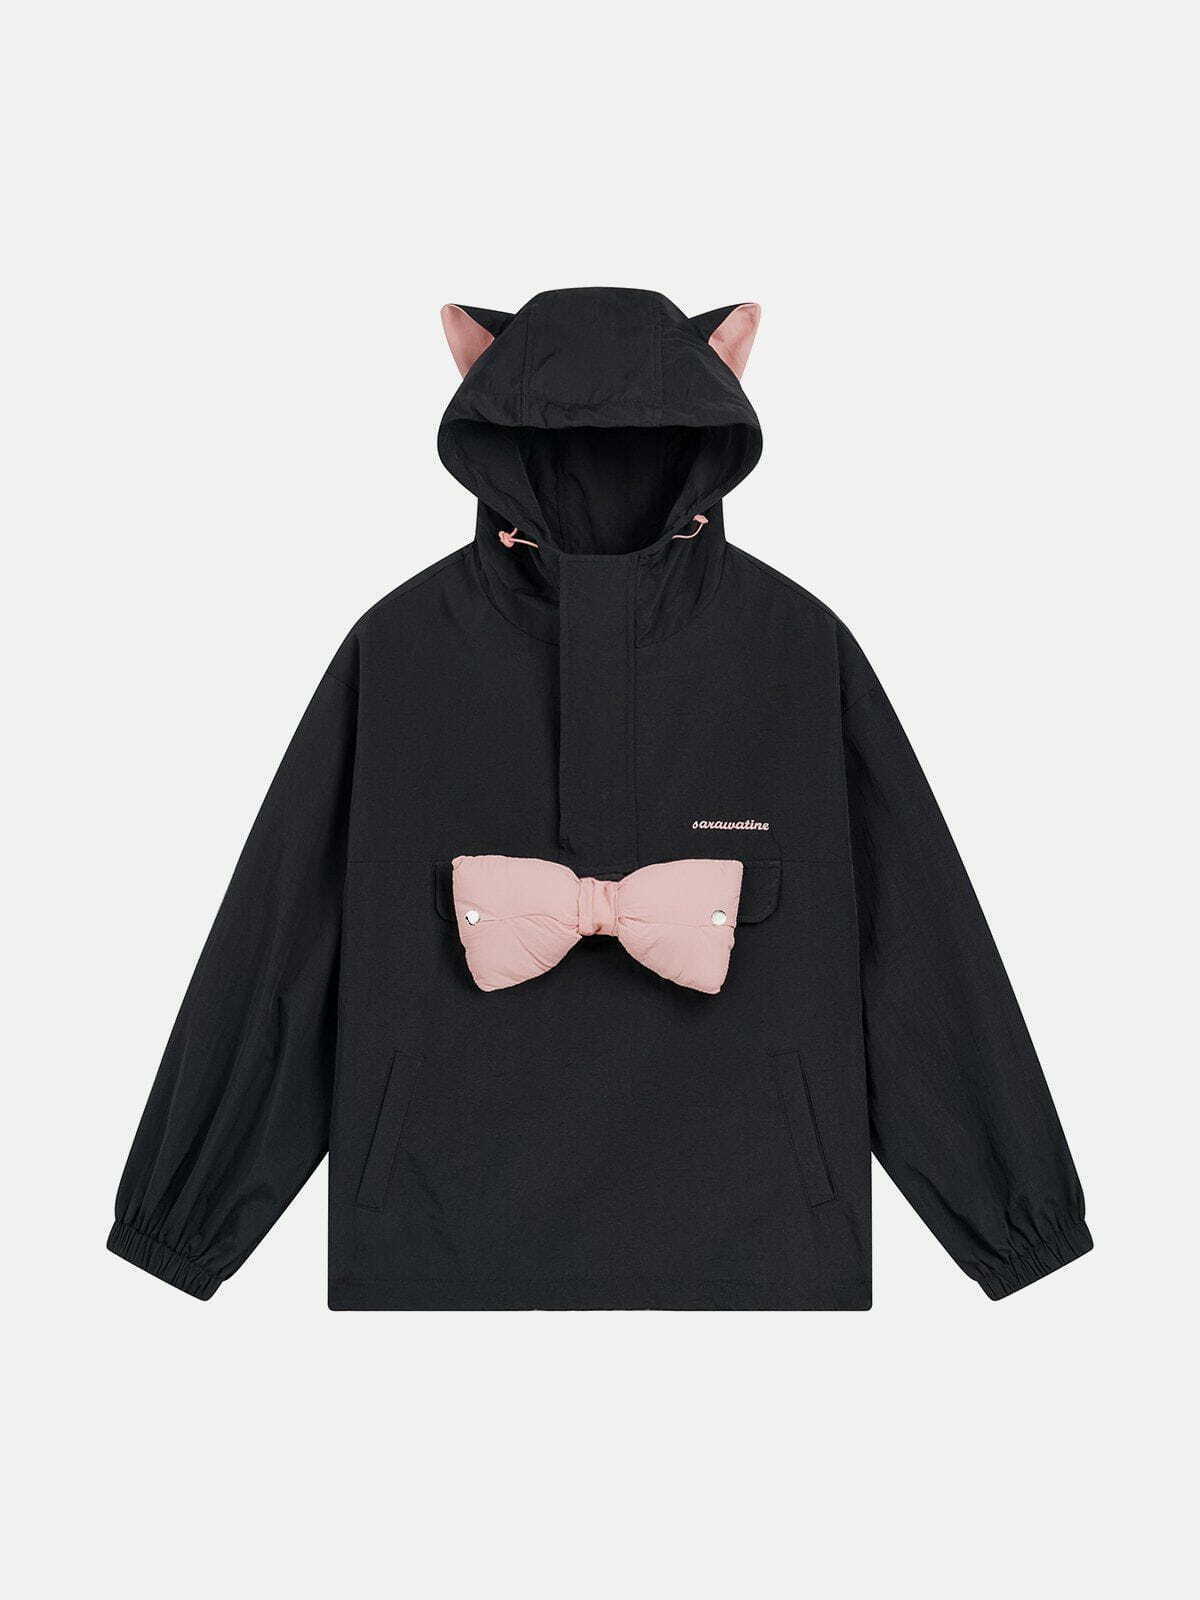 chic cat ear hoodie with bow tie   youthful urban appeal 5112